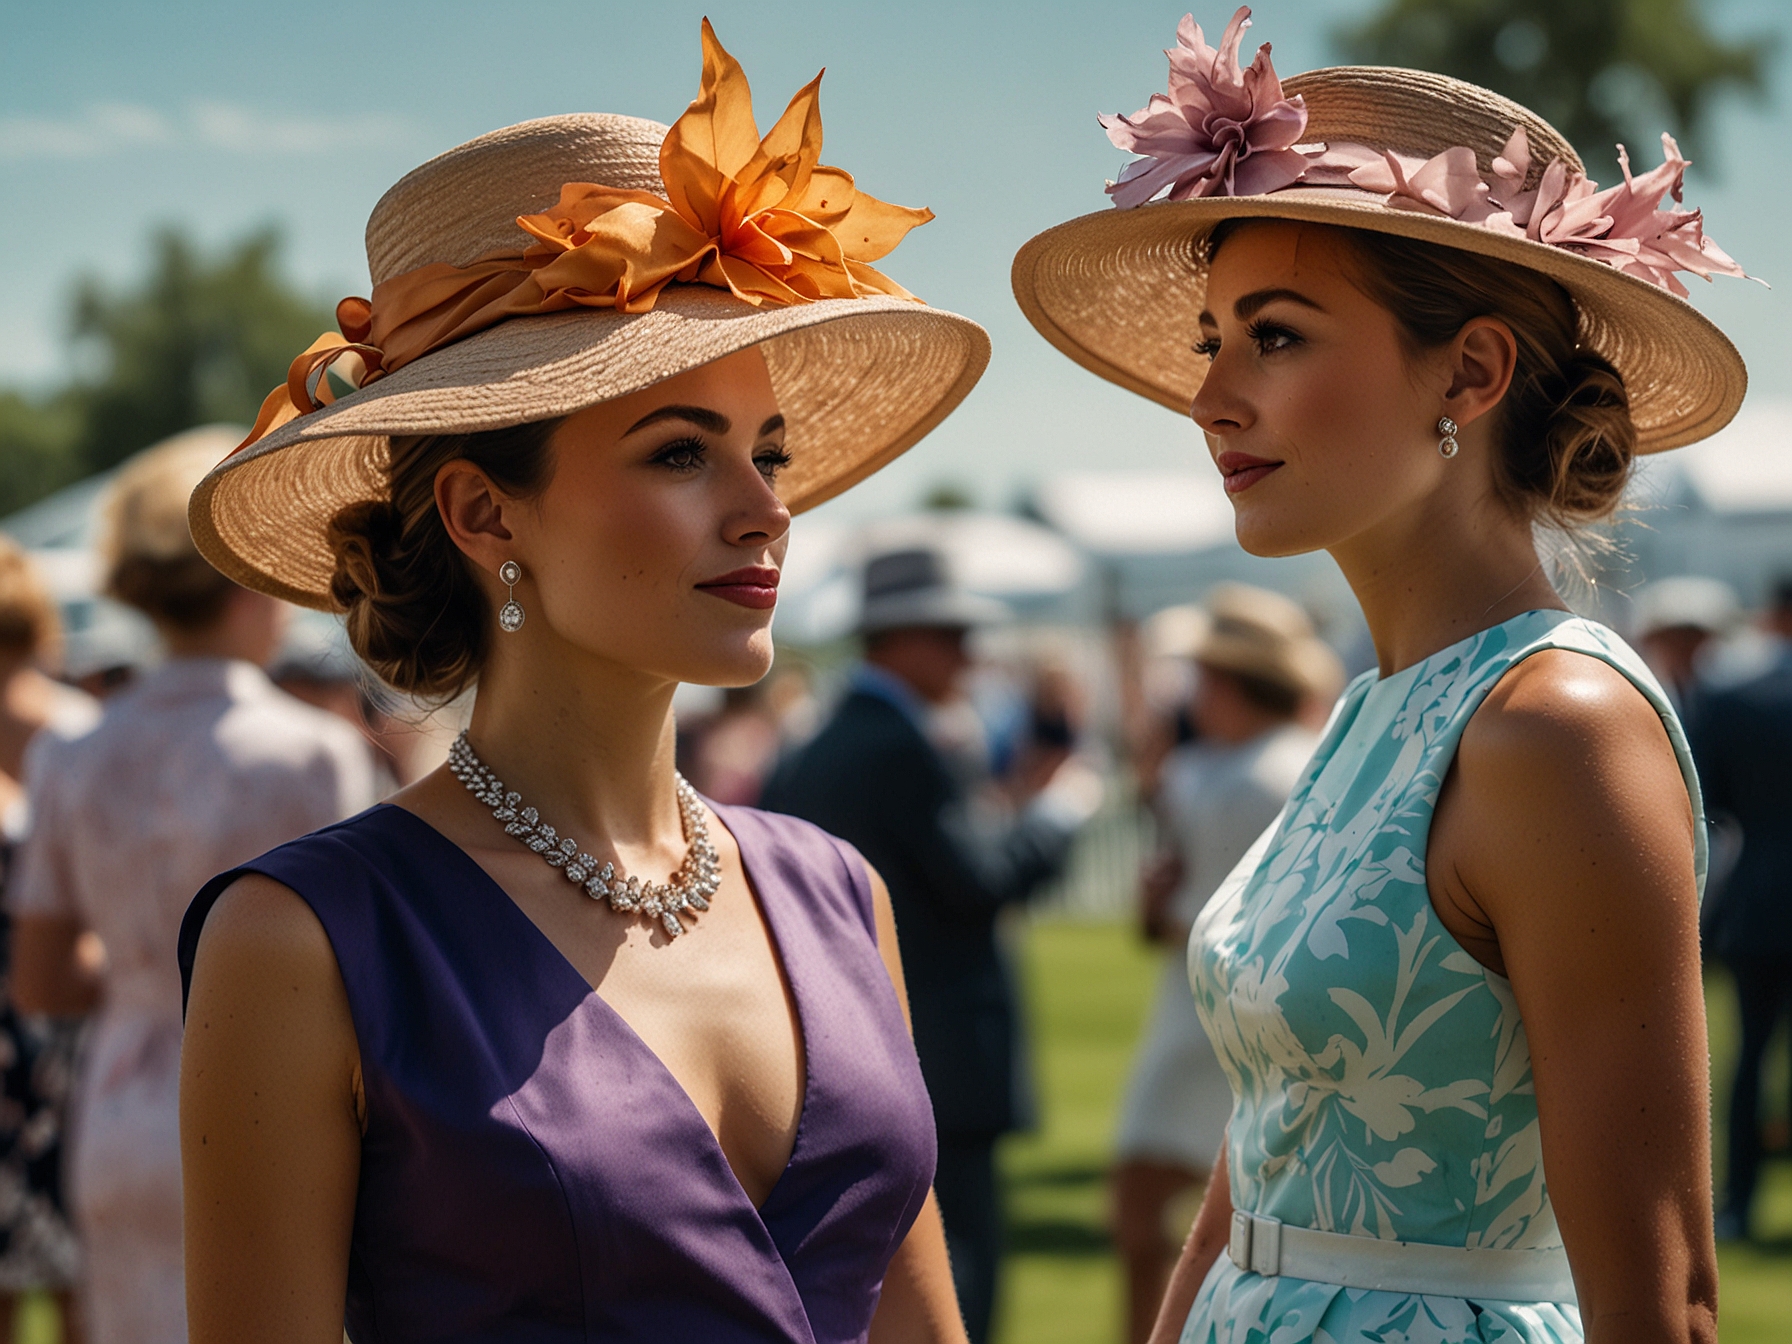 Guests flaunting elegant fashions during Ladies' Day at the Qatar Goodwood Festival, showcasing a variety of exquisite outfits and hats in a vibrant, social atmosphere.